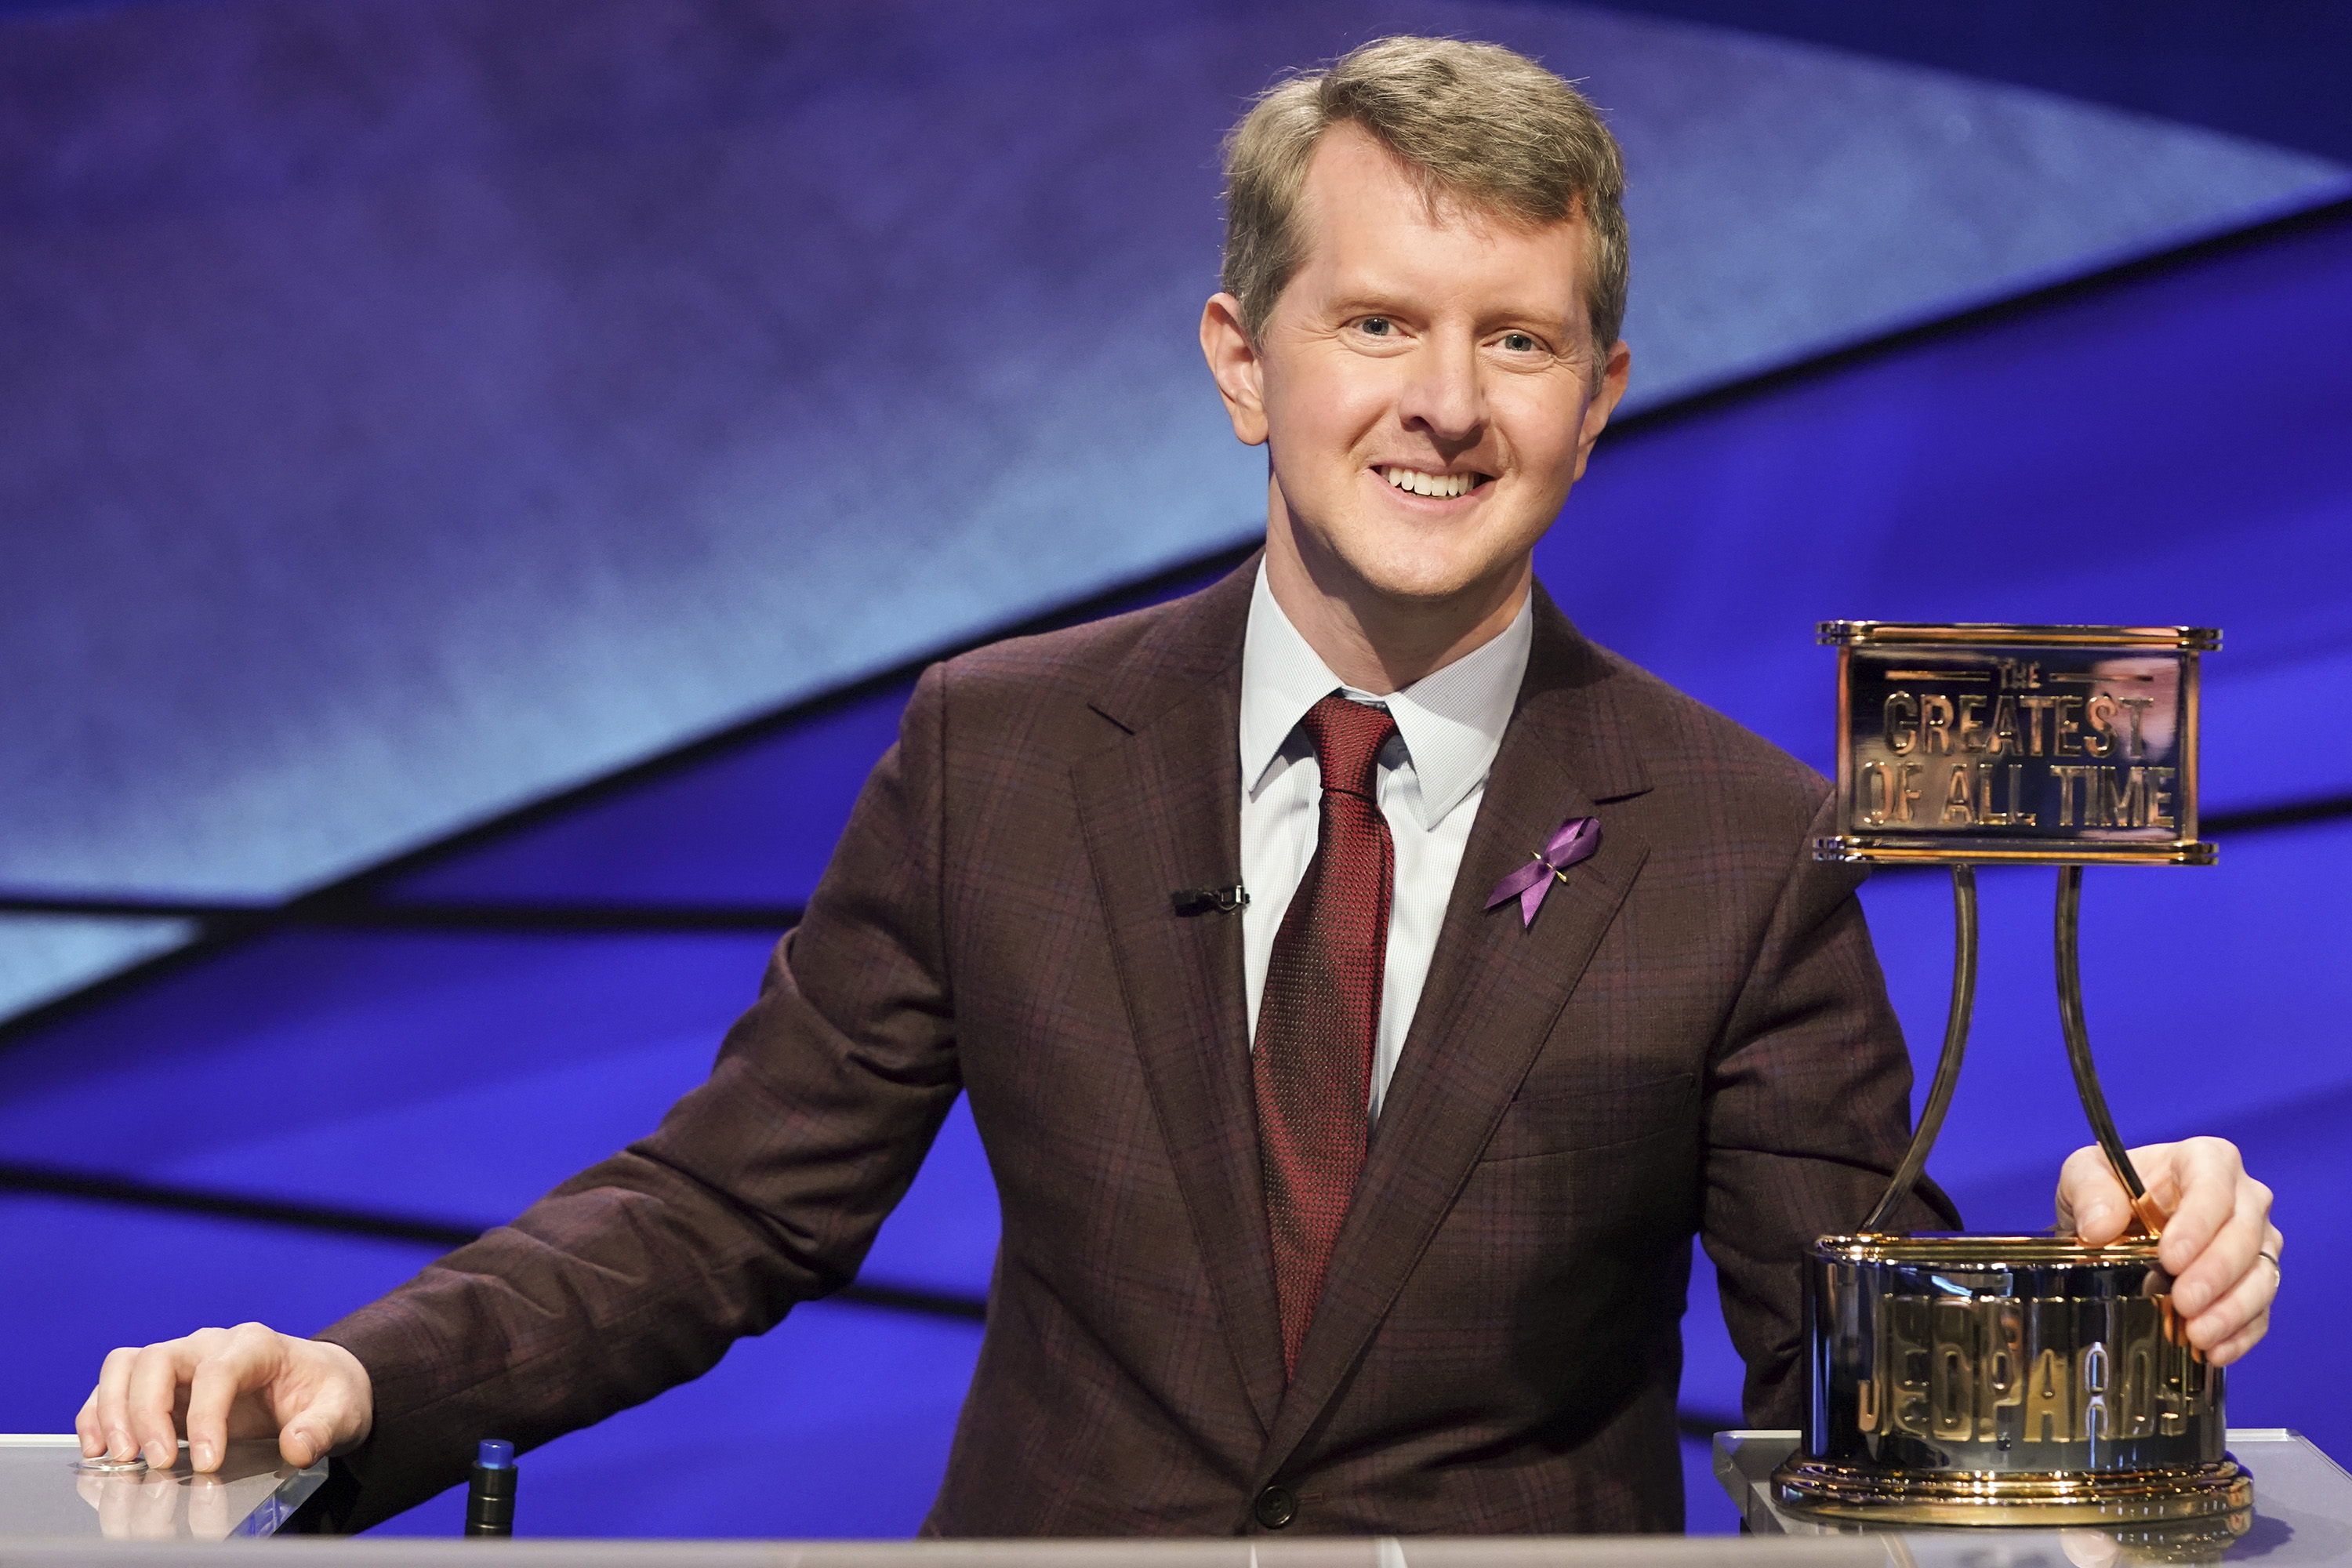 ‘Jeopardy!’ GOAT Ken Jennings Gives a Shout Out to Current Champ Ryan Long